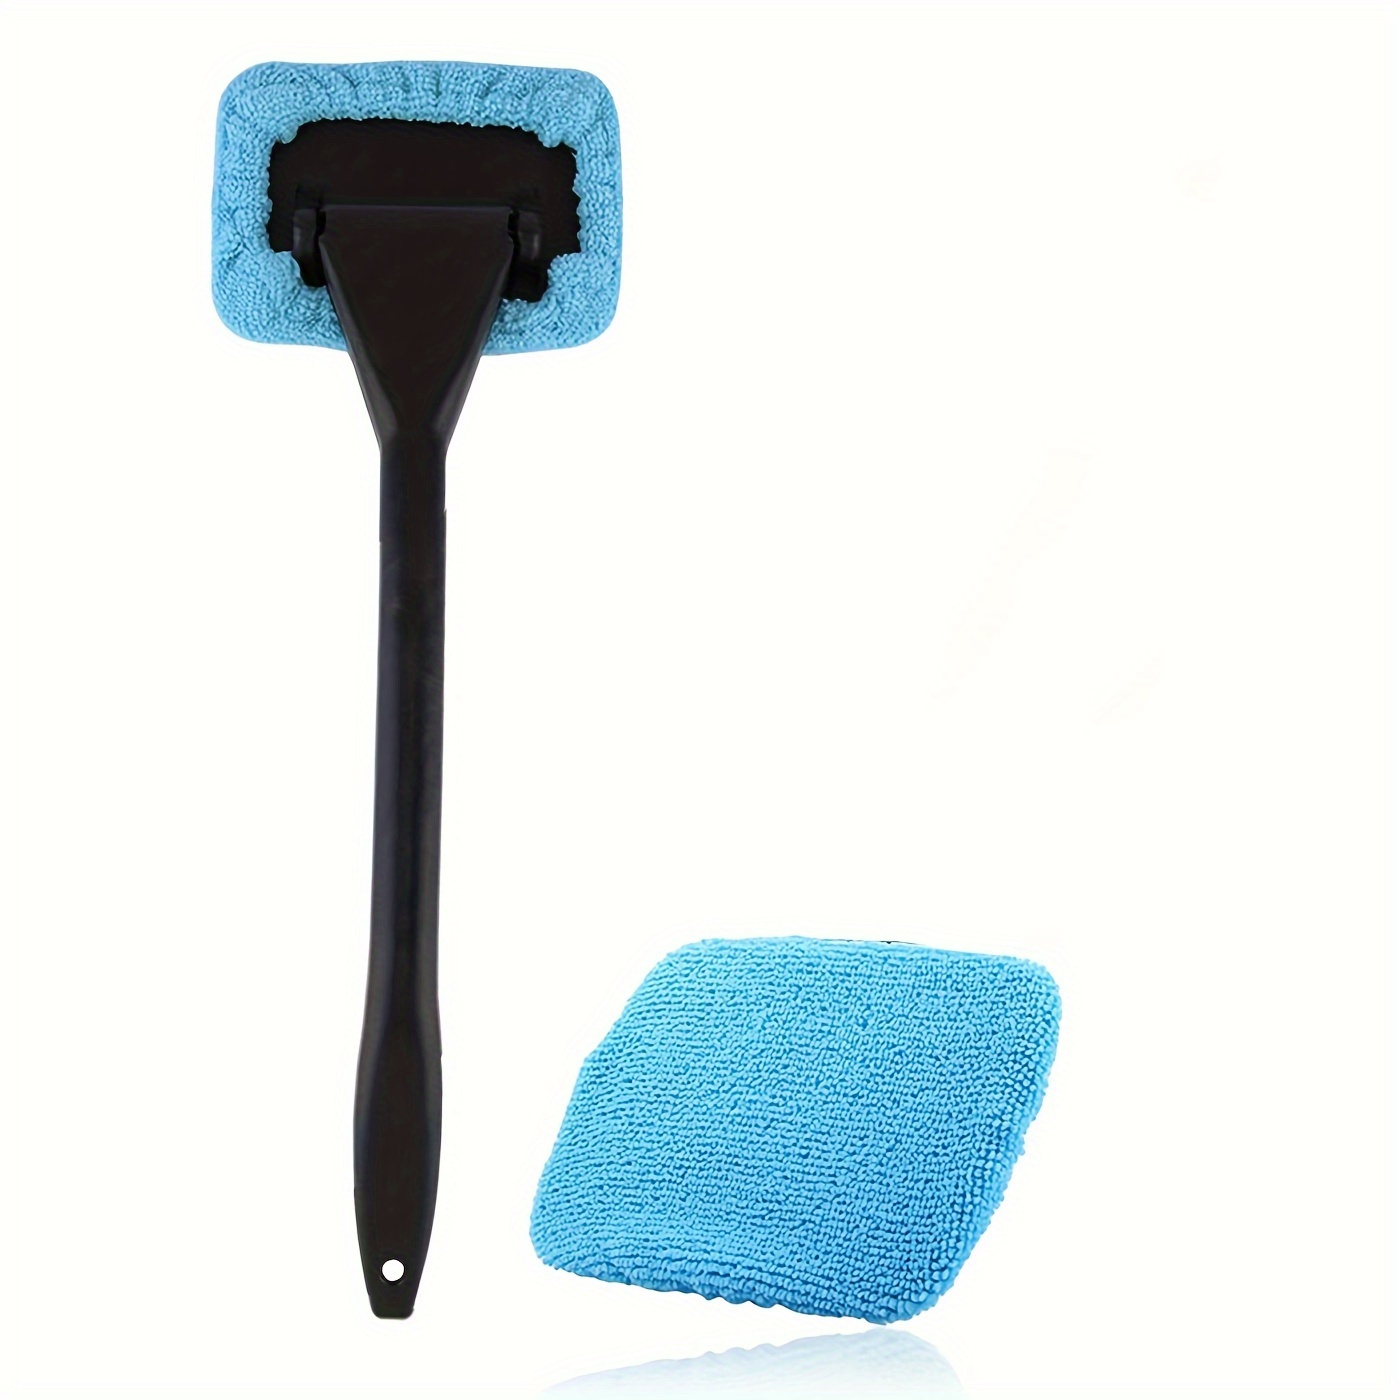 1pc, Long Handle Car Window Windshield Cleaner Brush Kit - Easy To Use Wipe  Tool For Cleaning And Protecting Your Windshield Only د.ب.‏ 1.50 بات بات  Mobile